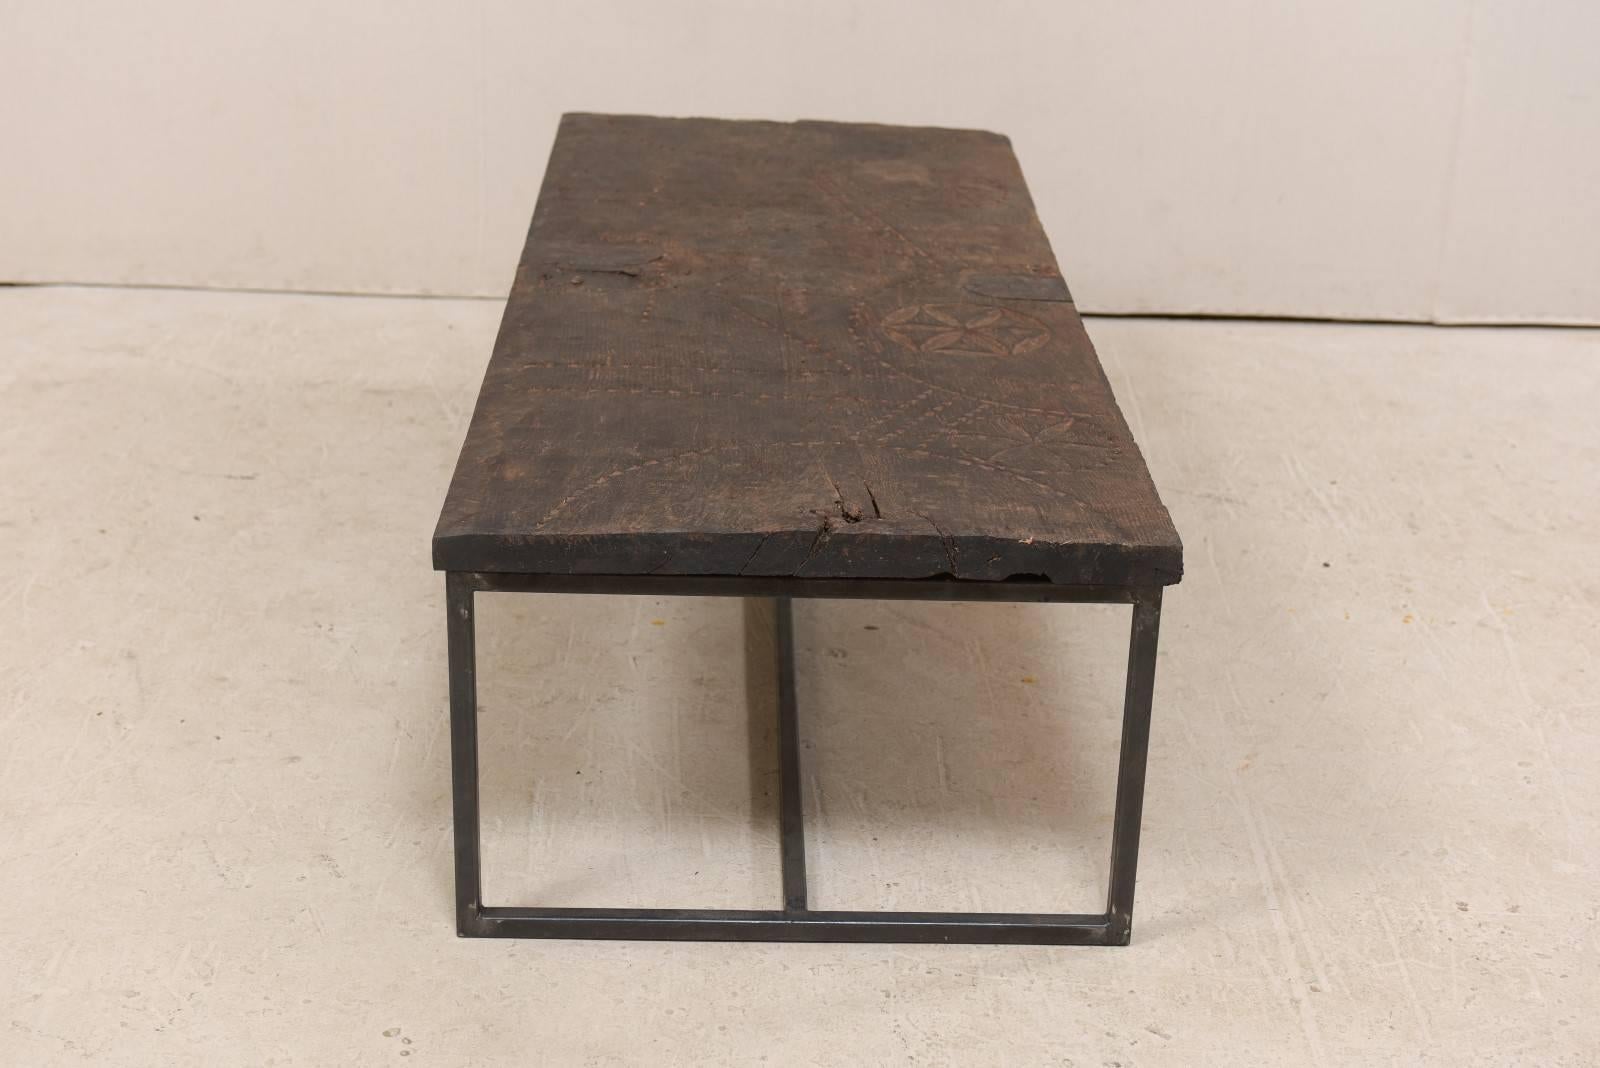 Rustic Coffee Table Made from 18th Century Spanish Wood Door and Custom Iron Base